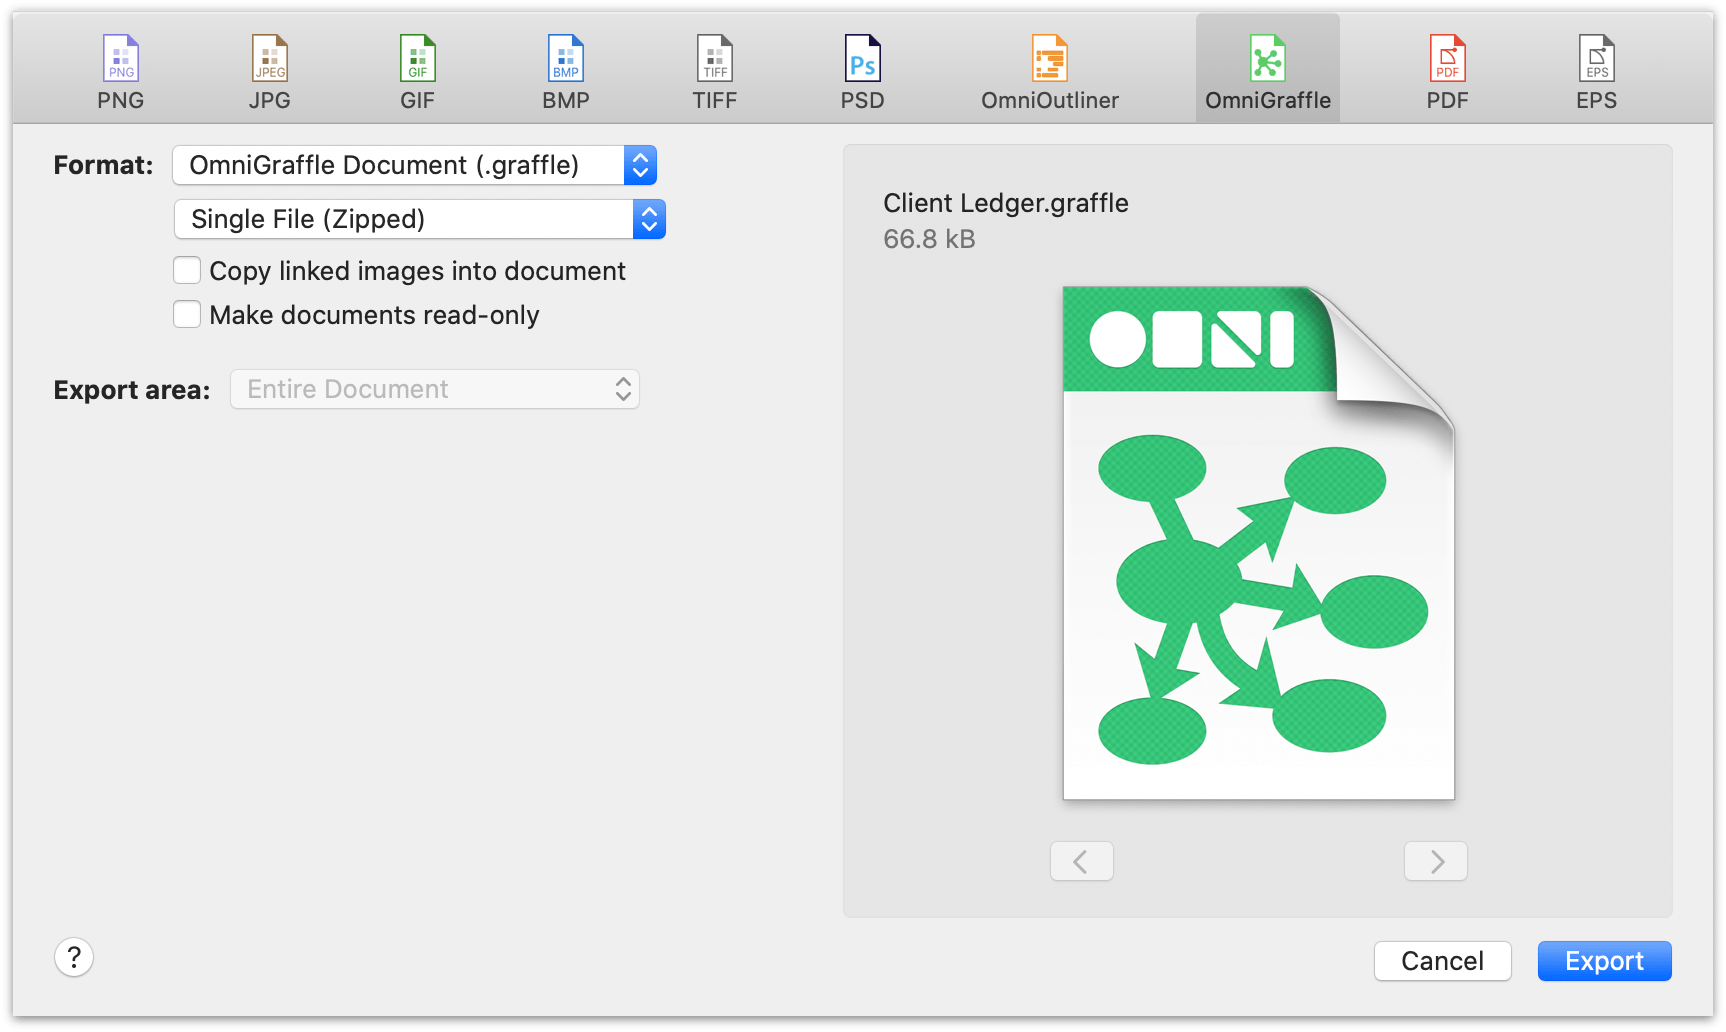 Exporting as an OmniGraffle Stencil file